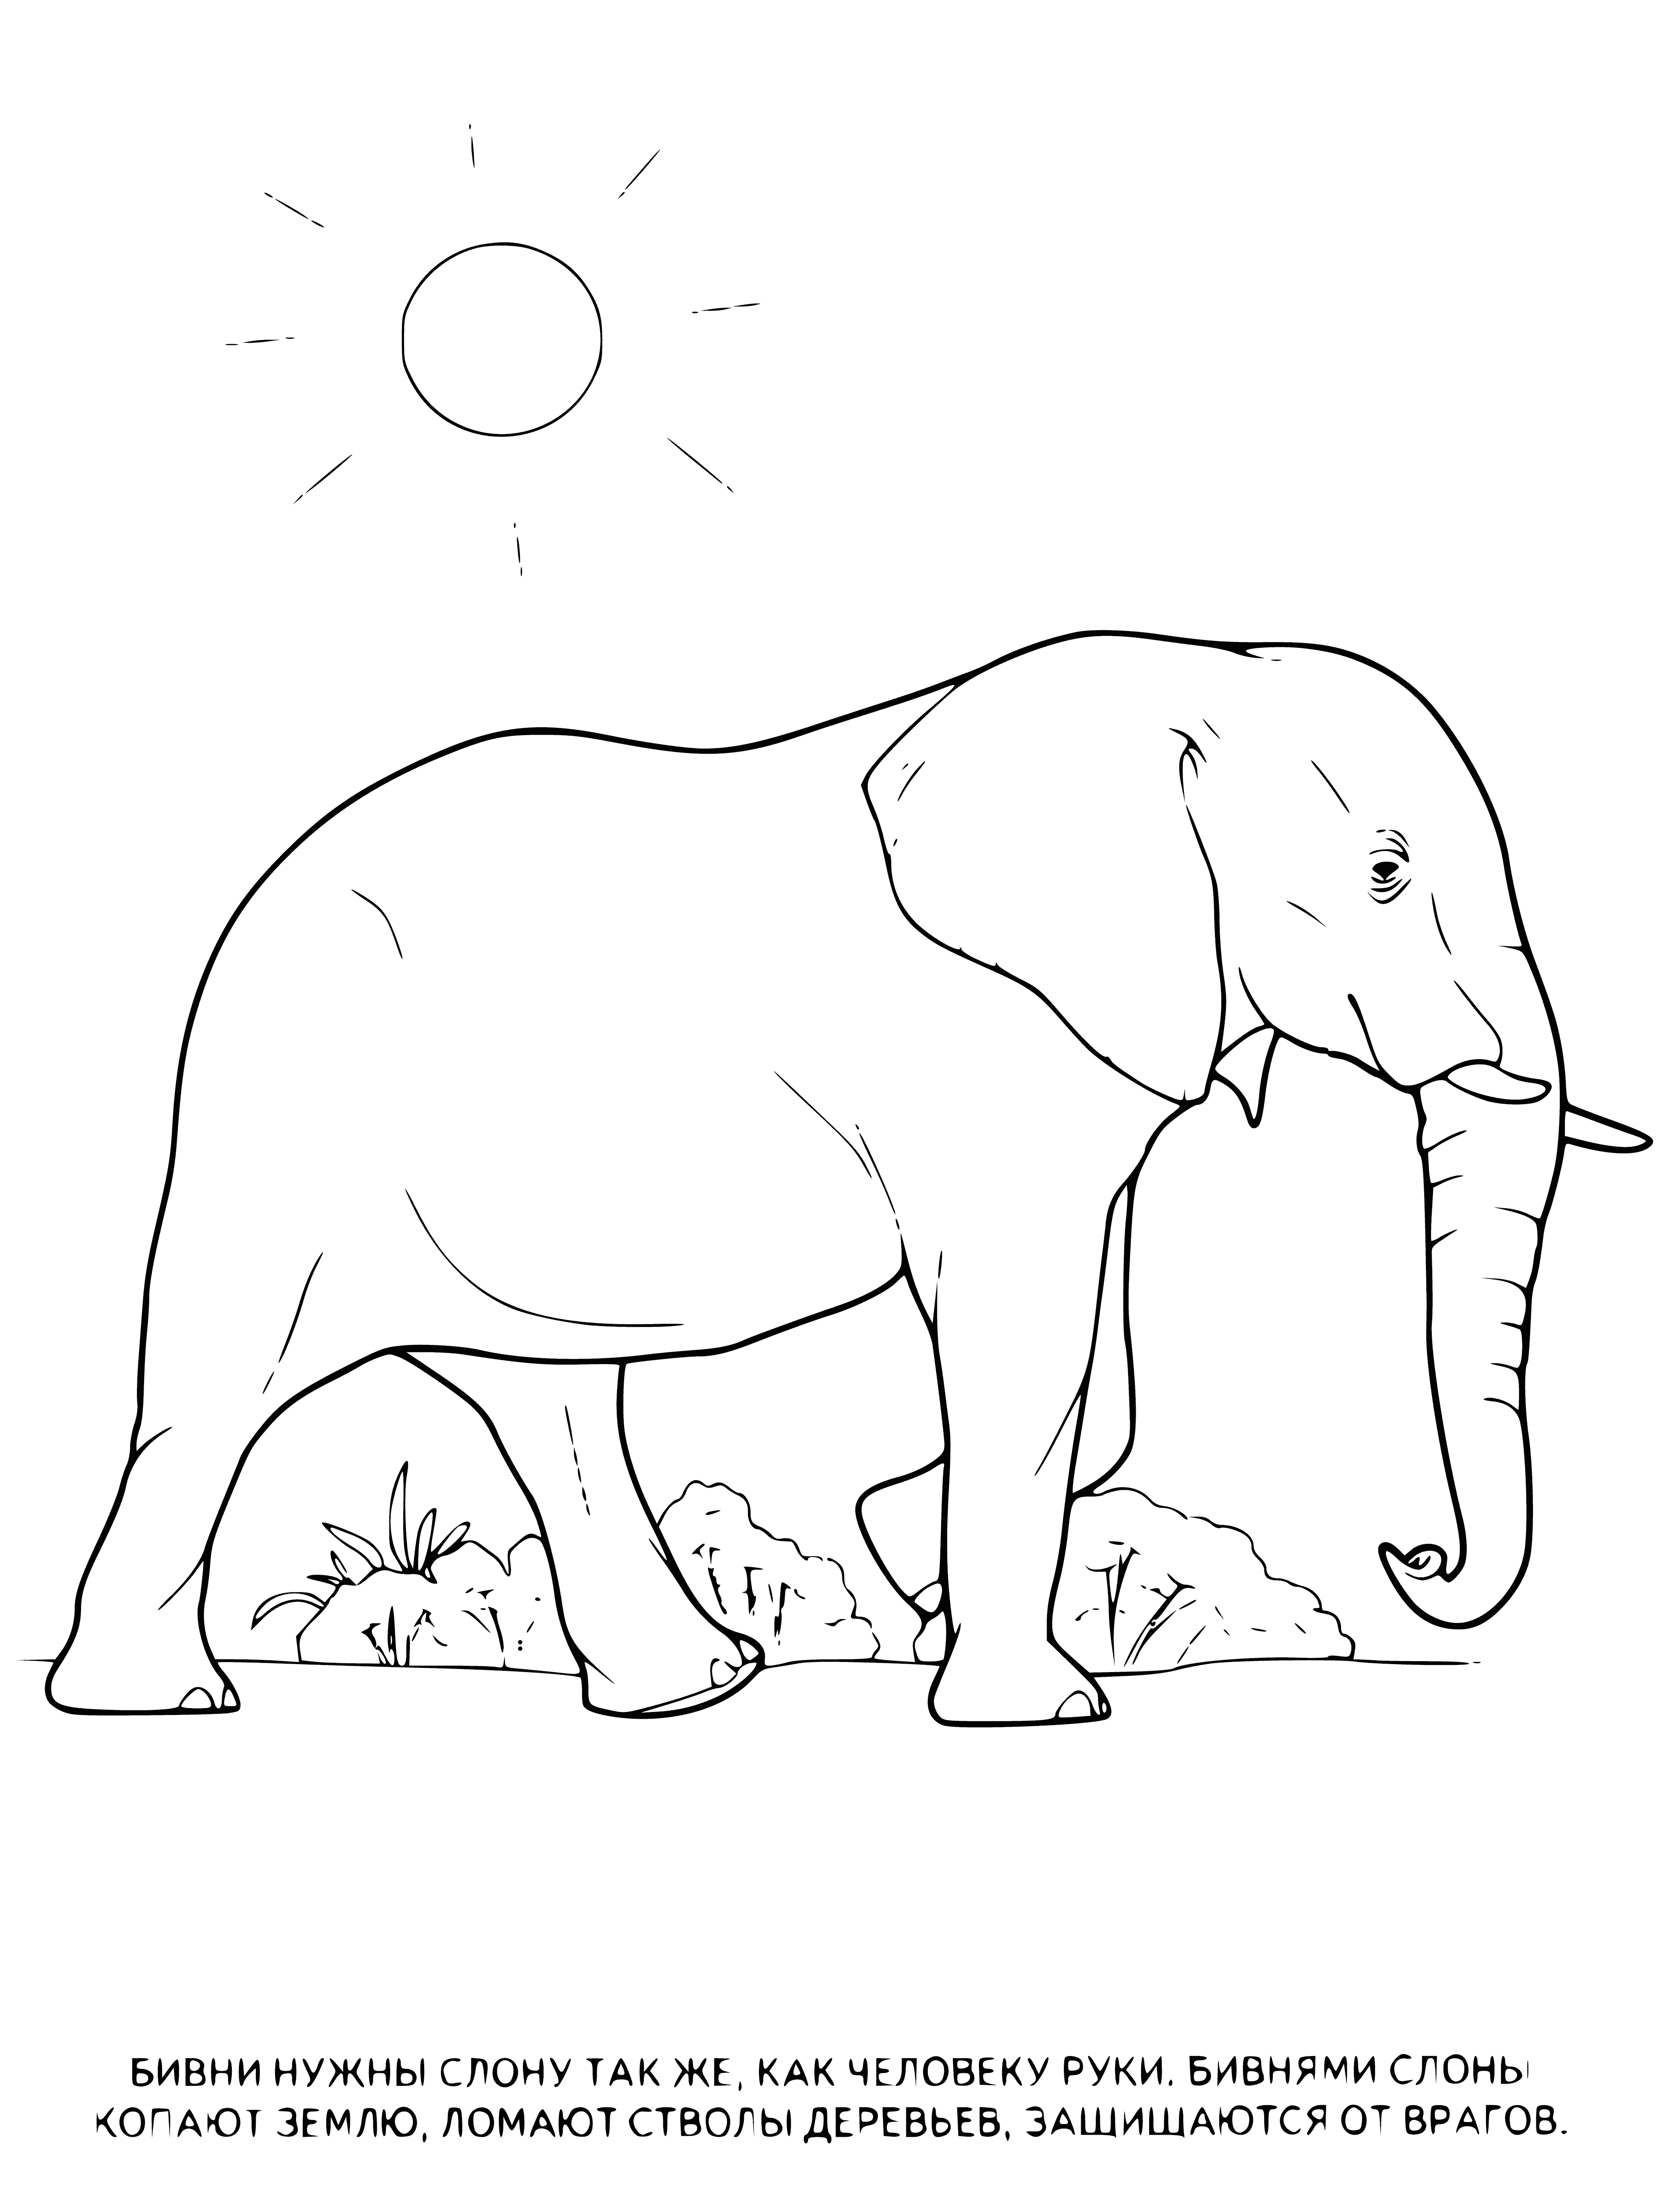 coloring page: A huge gray elephant stands in a muddy river; its trunk extended, ears flapping, and skin muddied.